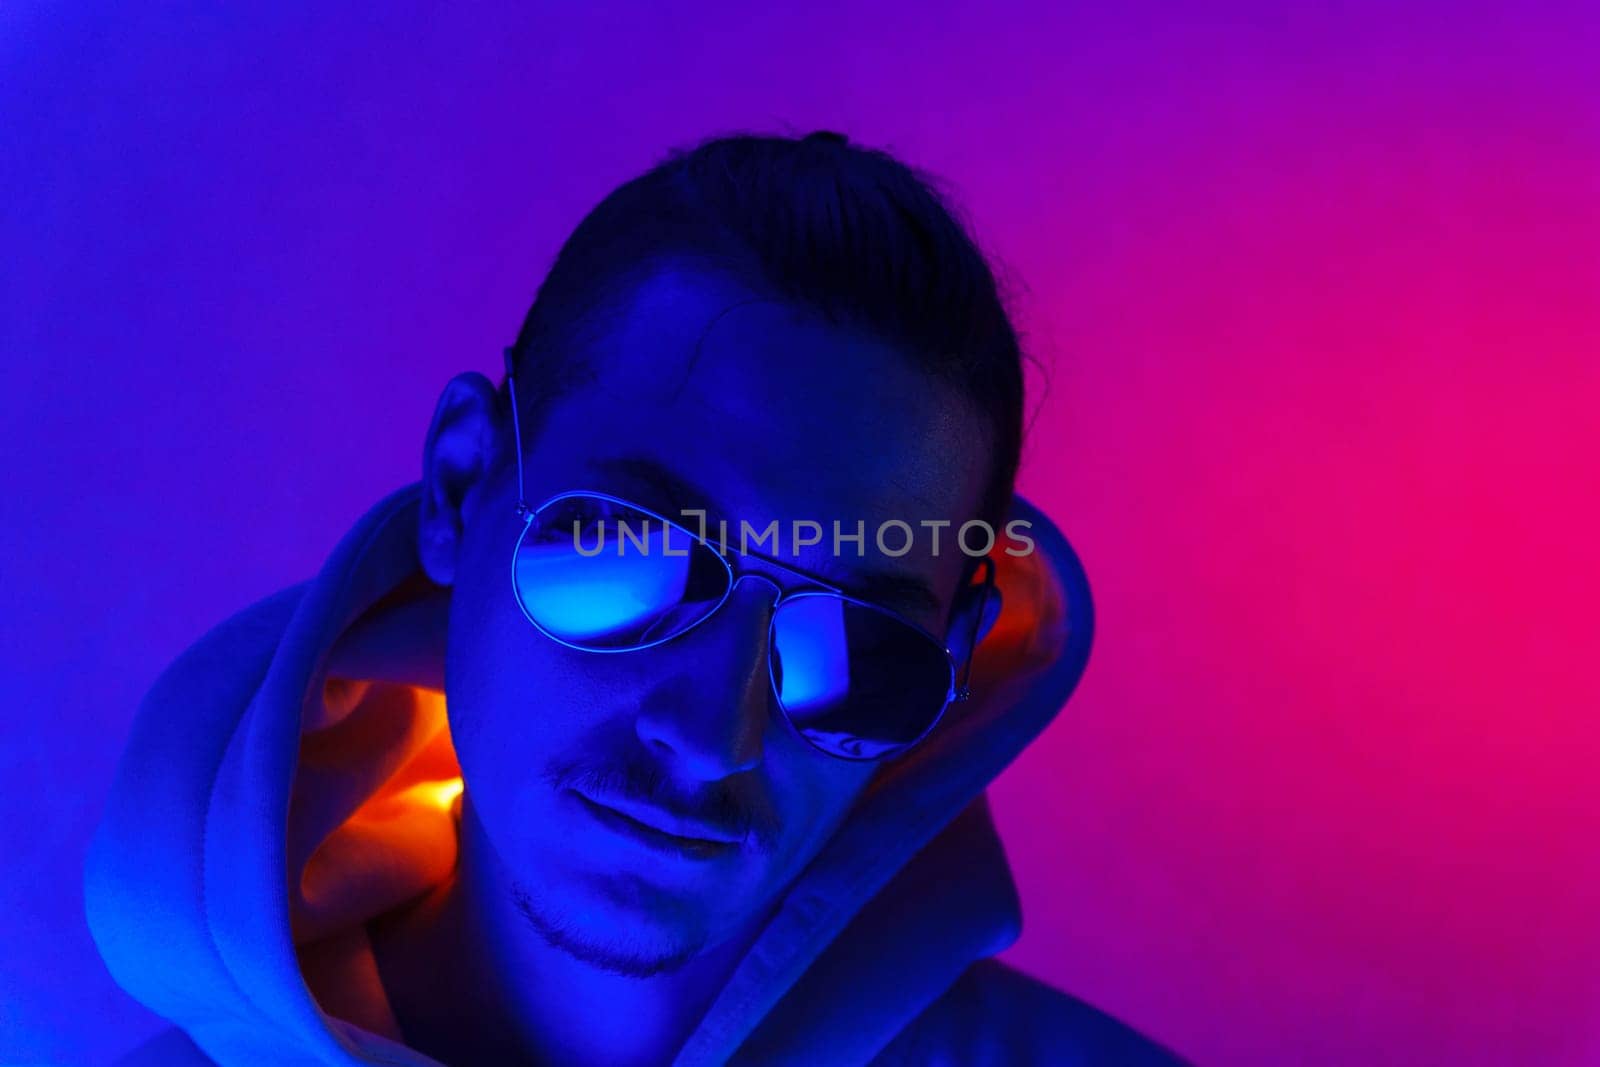 Neon light studio close-up portrait of a male model with a mustache and beard wearing sunglasses by darksoul72